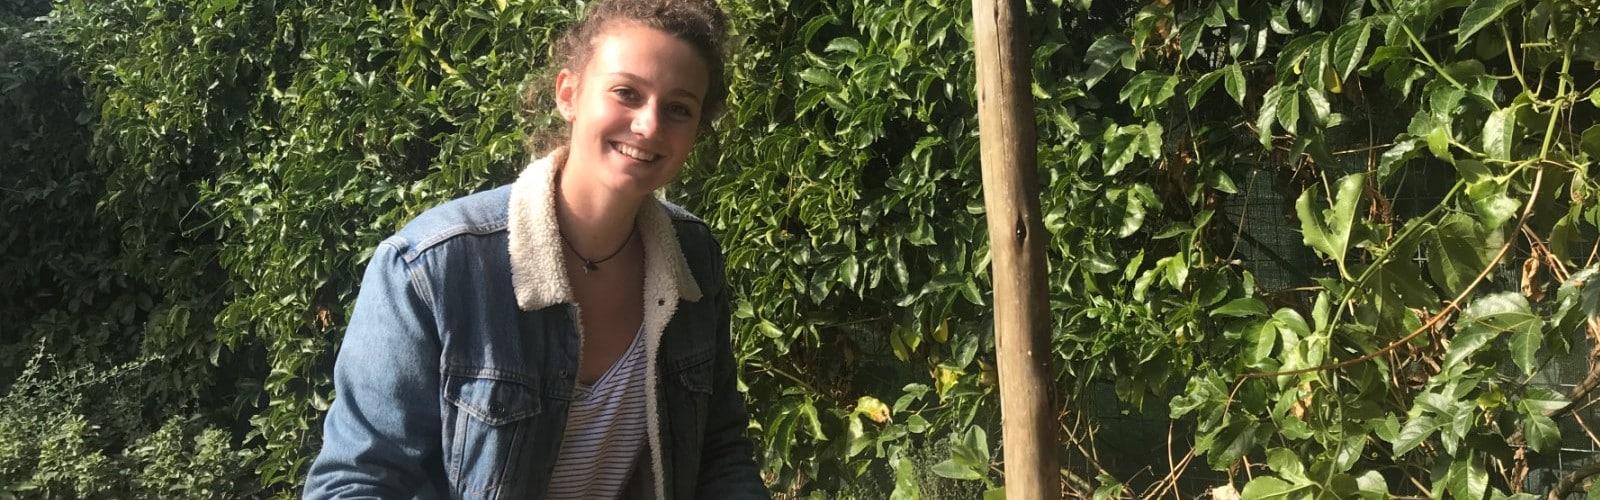 A day with Paula, Food Security and Urban Farming Intern